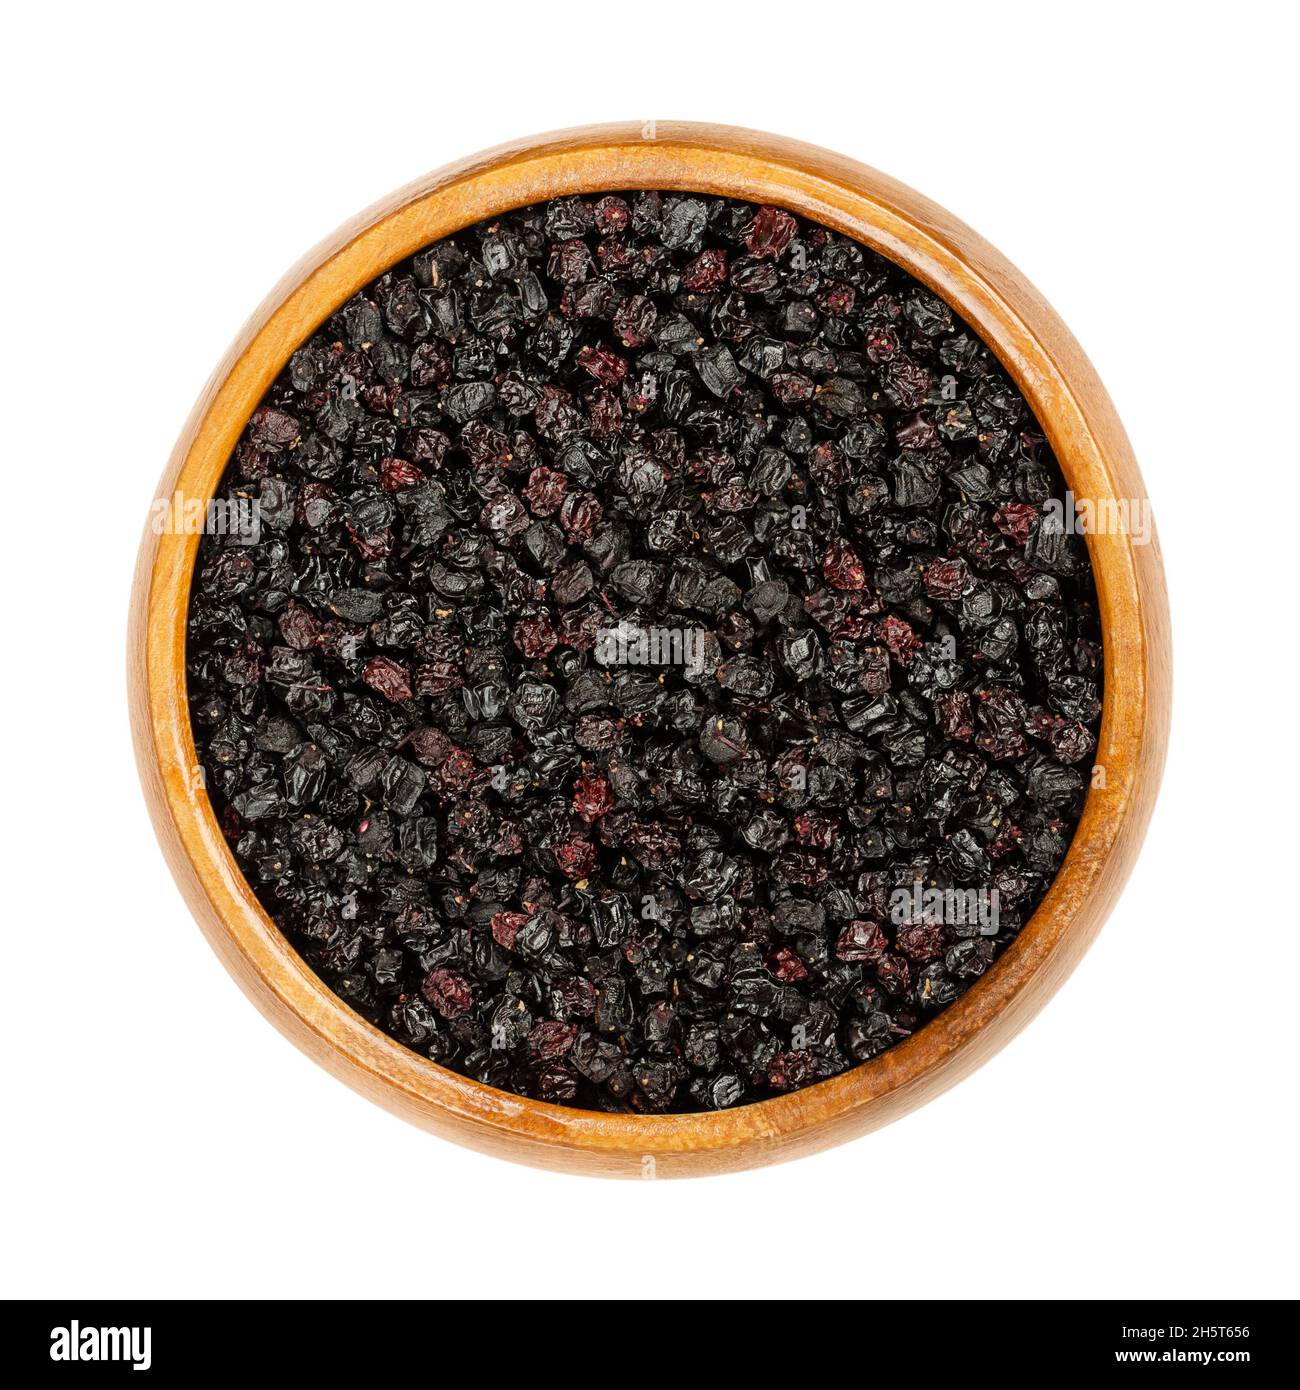 Dried elderberries in a wooden bowl. Ripe Sambucus berries. Elder or elderberry. Raw berries are not edible, but are used for steeping in hot teas. Stock Photo